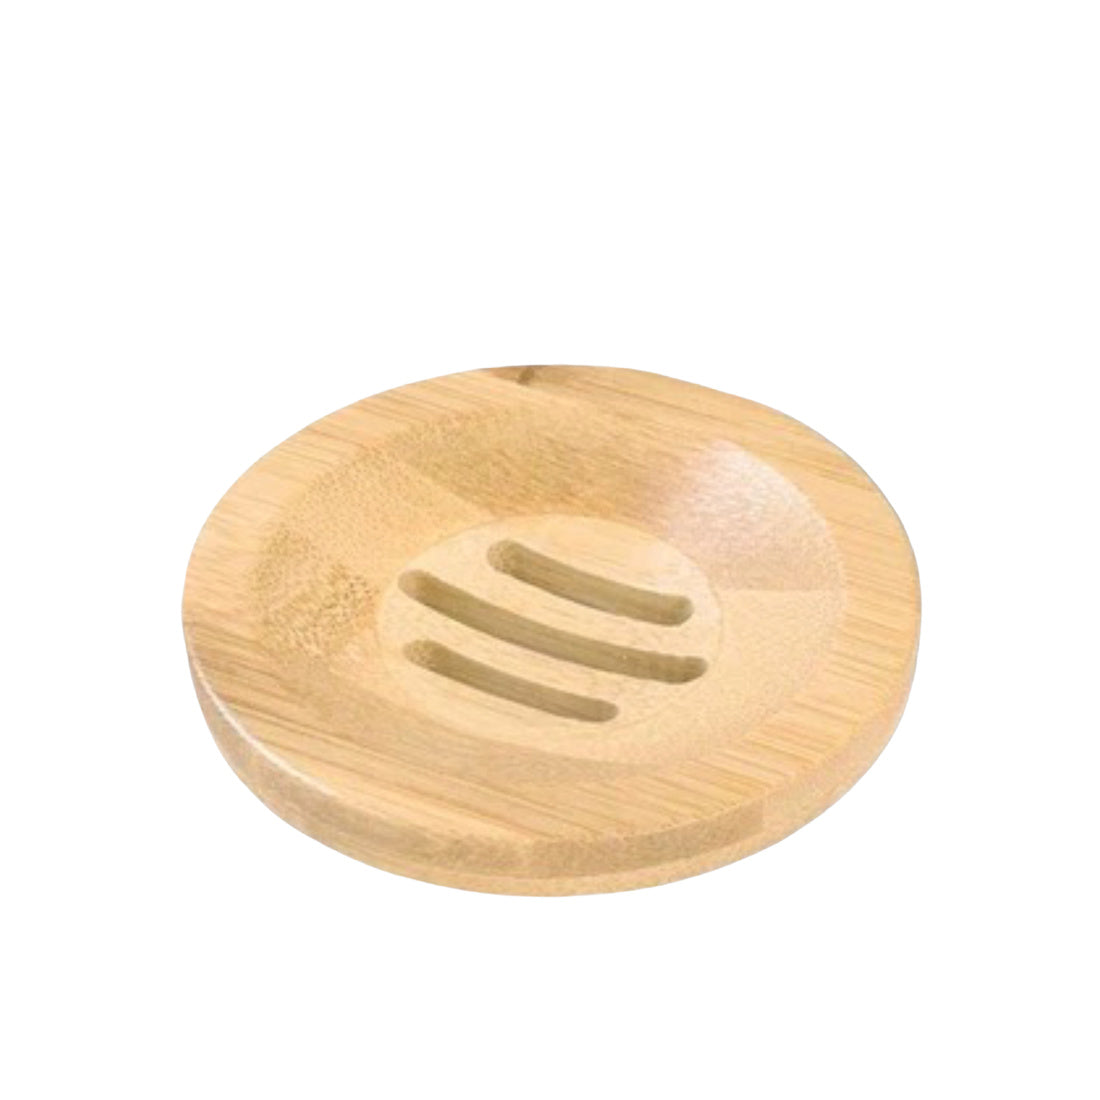 A round Lizush wooden shower steamer tray with three grooves in the center, designed to hold a shower steamer and allow water to drain, set against a white background.